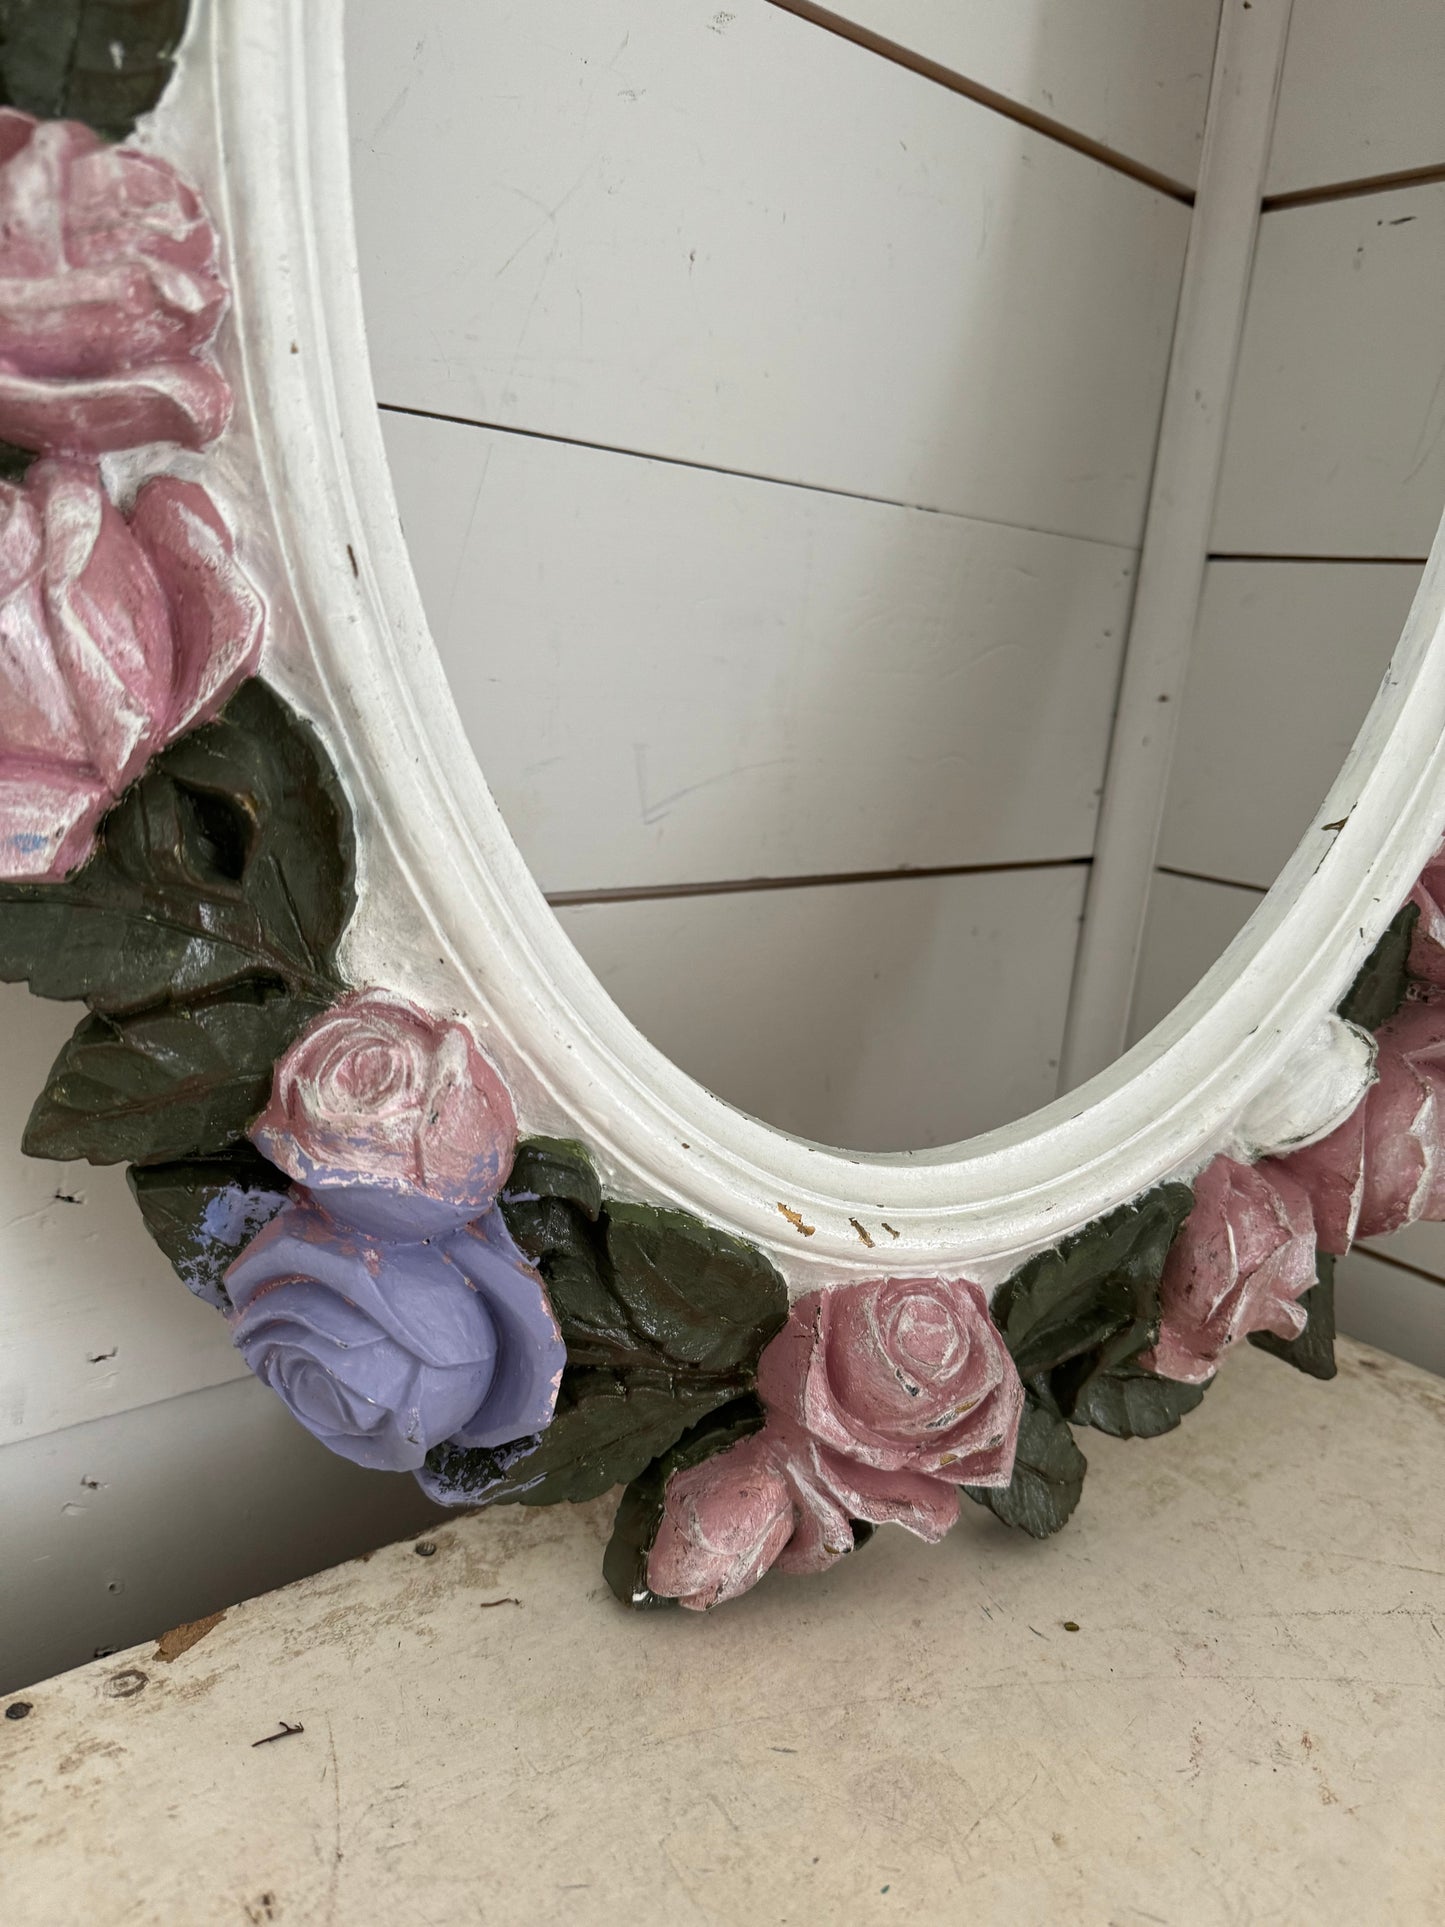 Home Interiors Rose Frame - purple rose will be painted